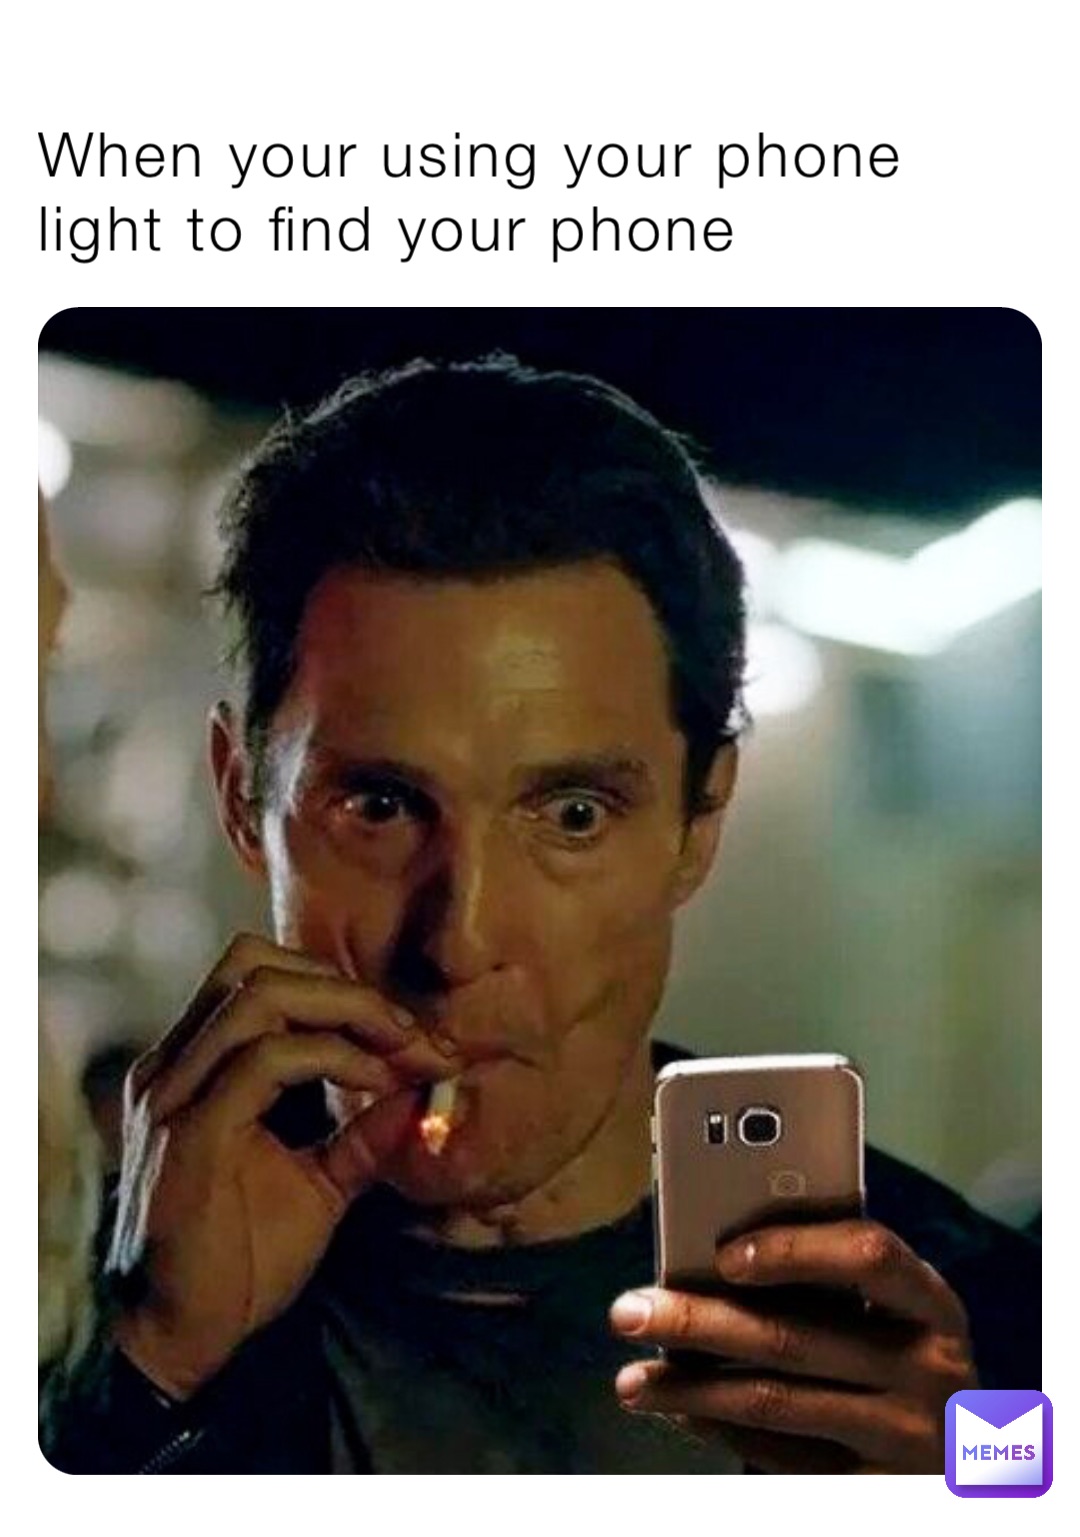 When your using your phone light to find your phone